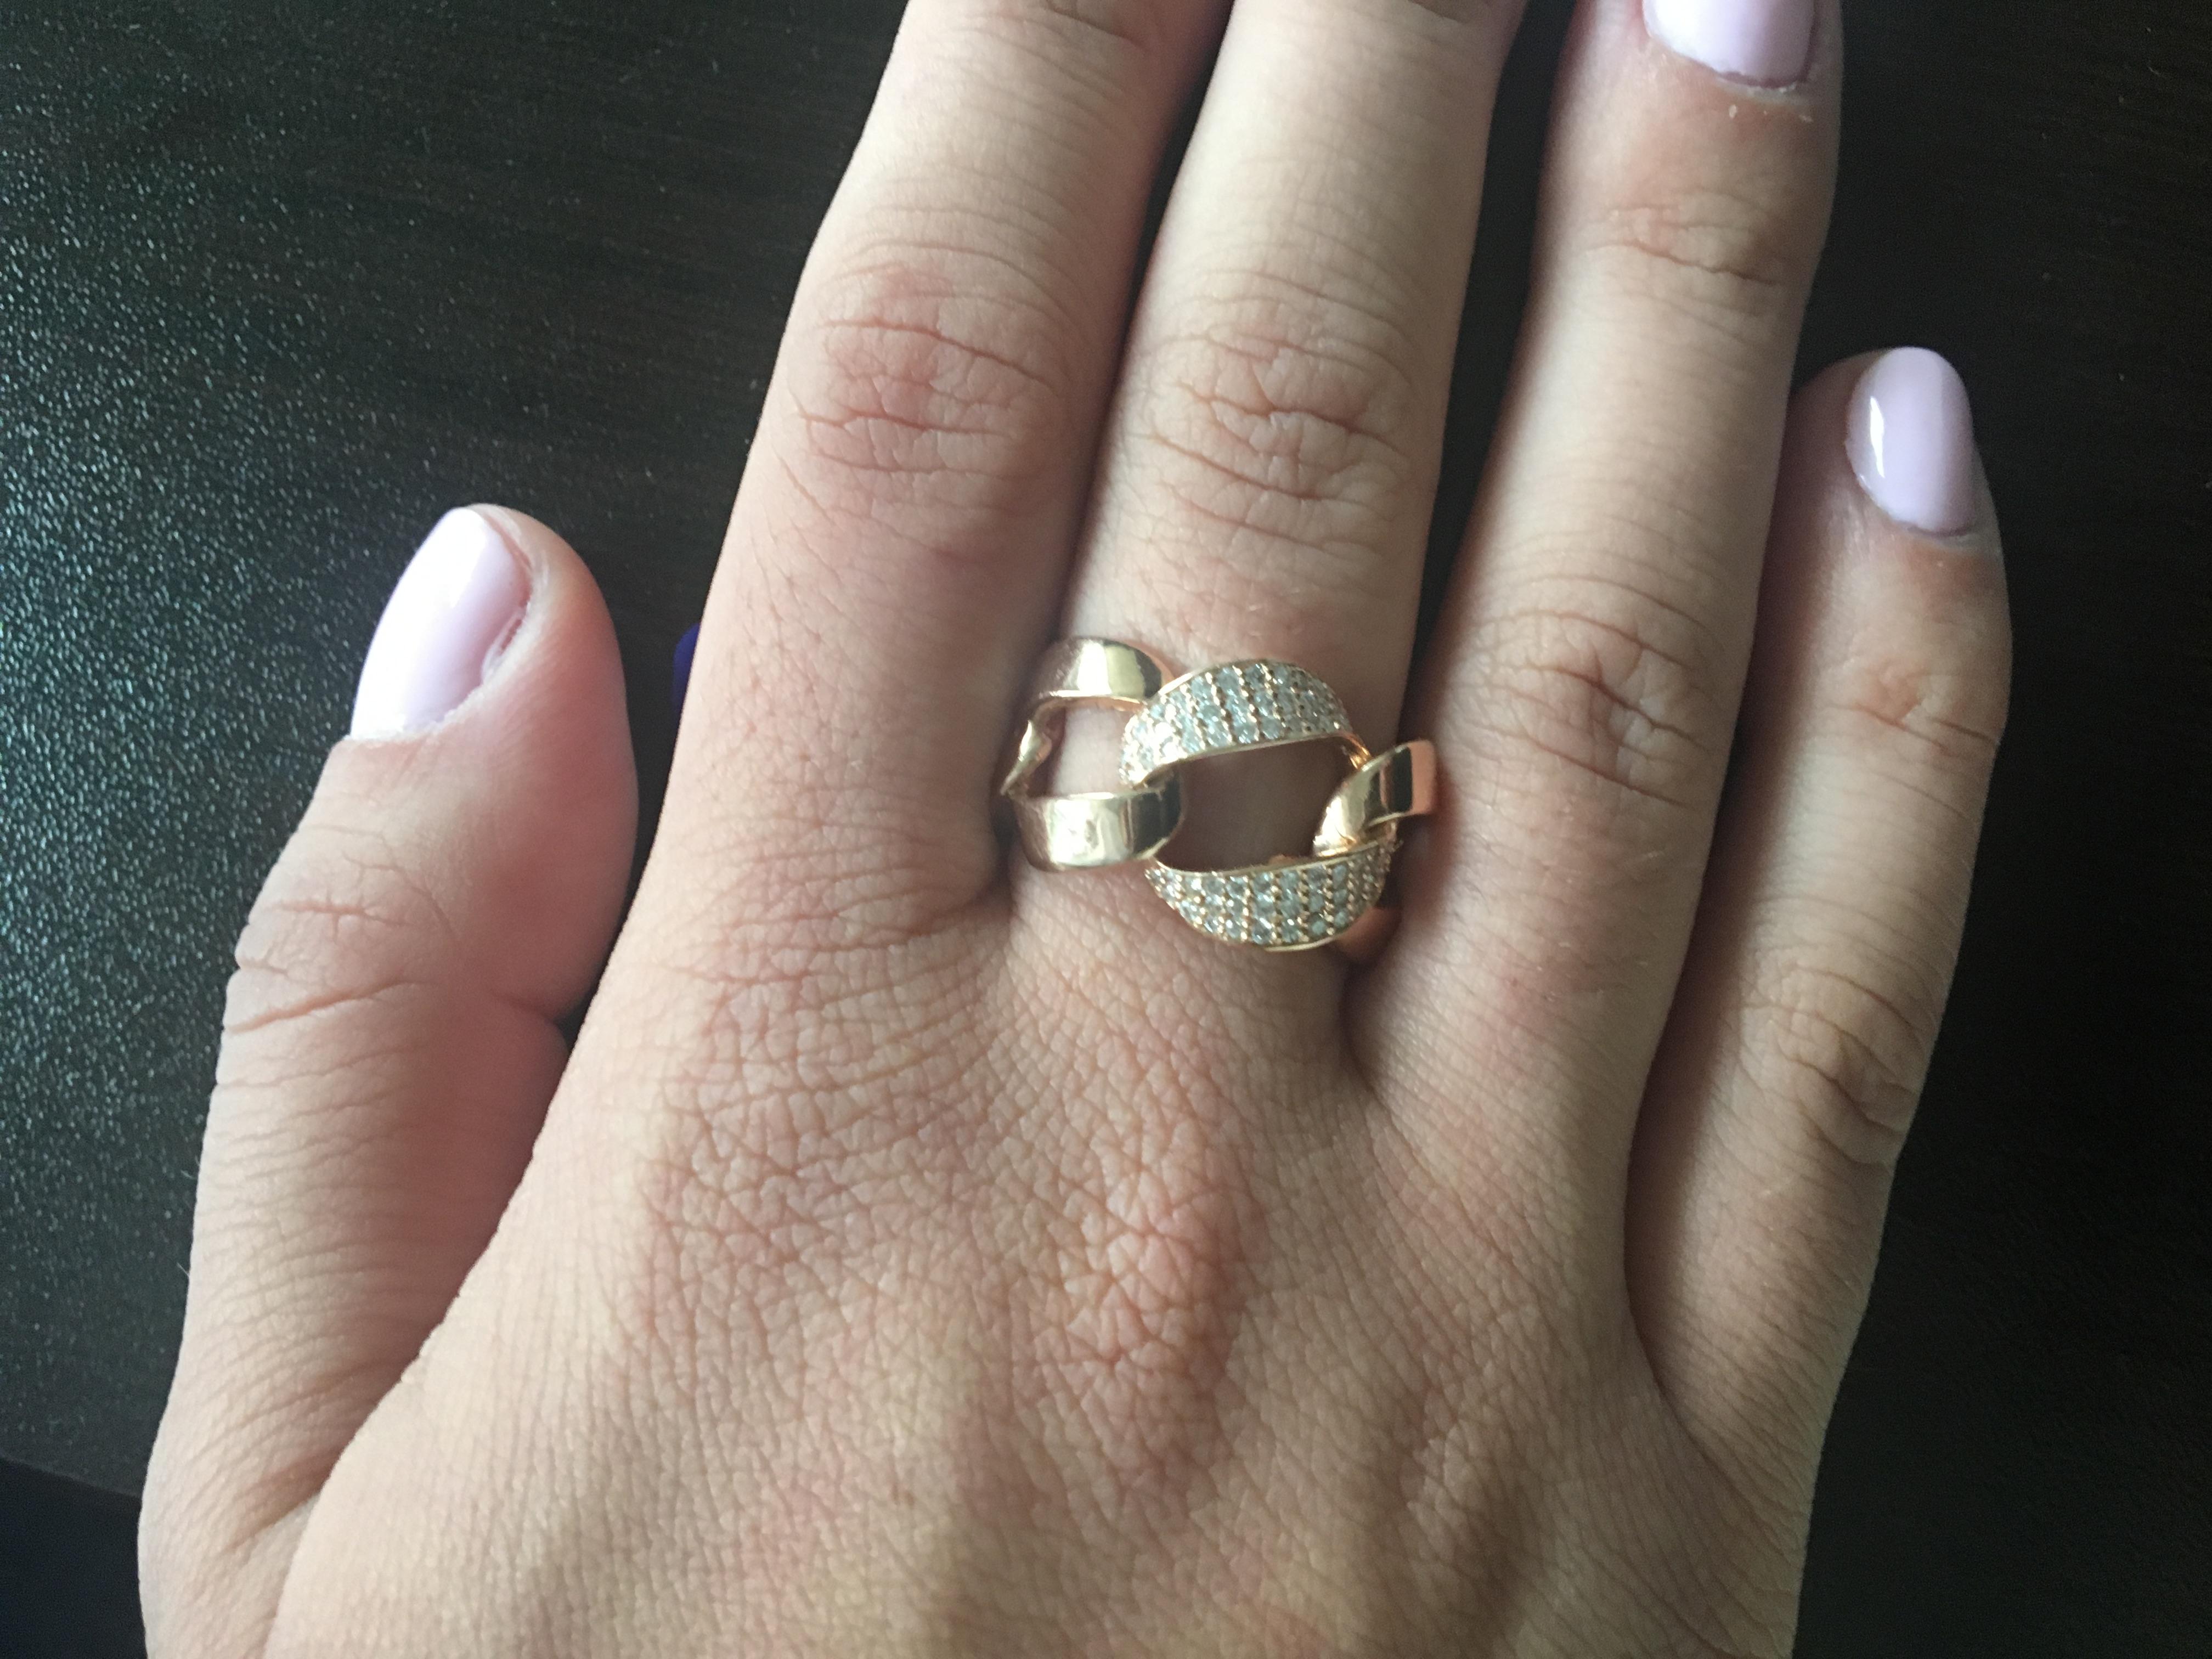 Chain link ring set in 14K rose gold. The total carat weight is 0.40 in diamonds. The color and clarity is G and the clarity is SI. This chain ring is the latest fashion in the jewelry industry. It's a timeless piece that every woman can wear. The